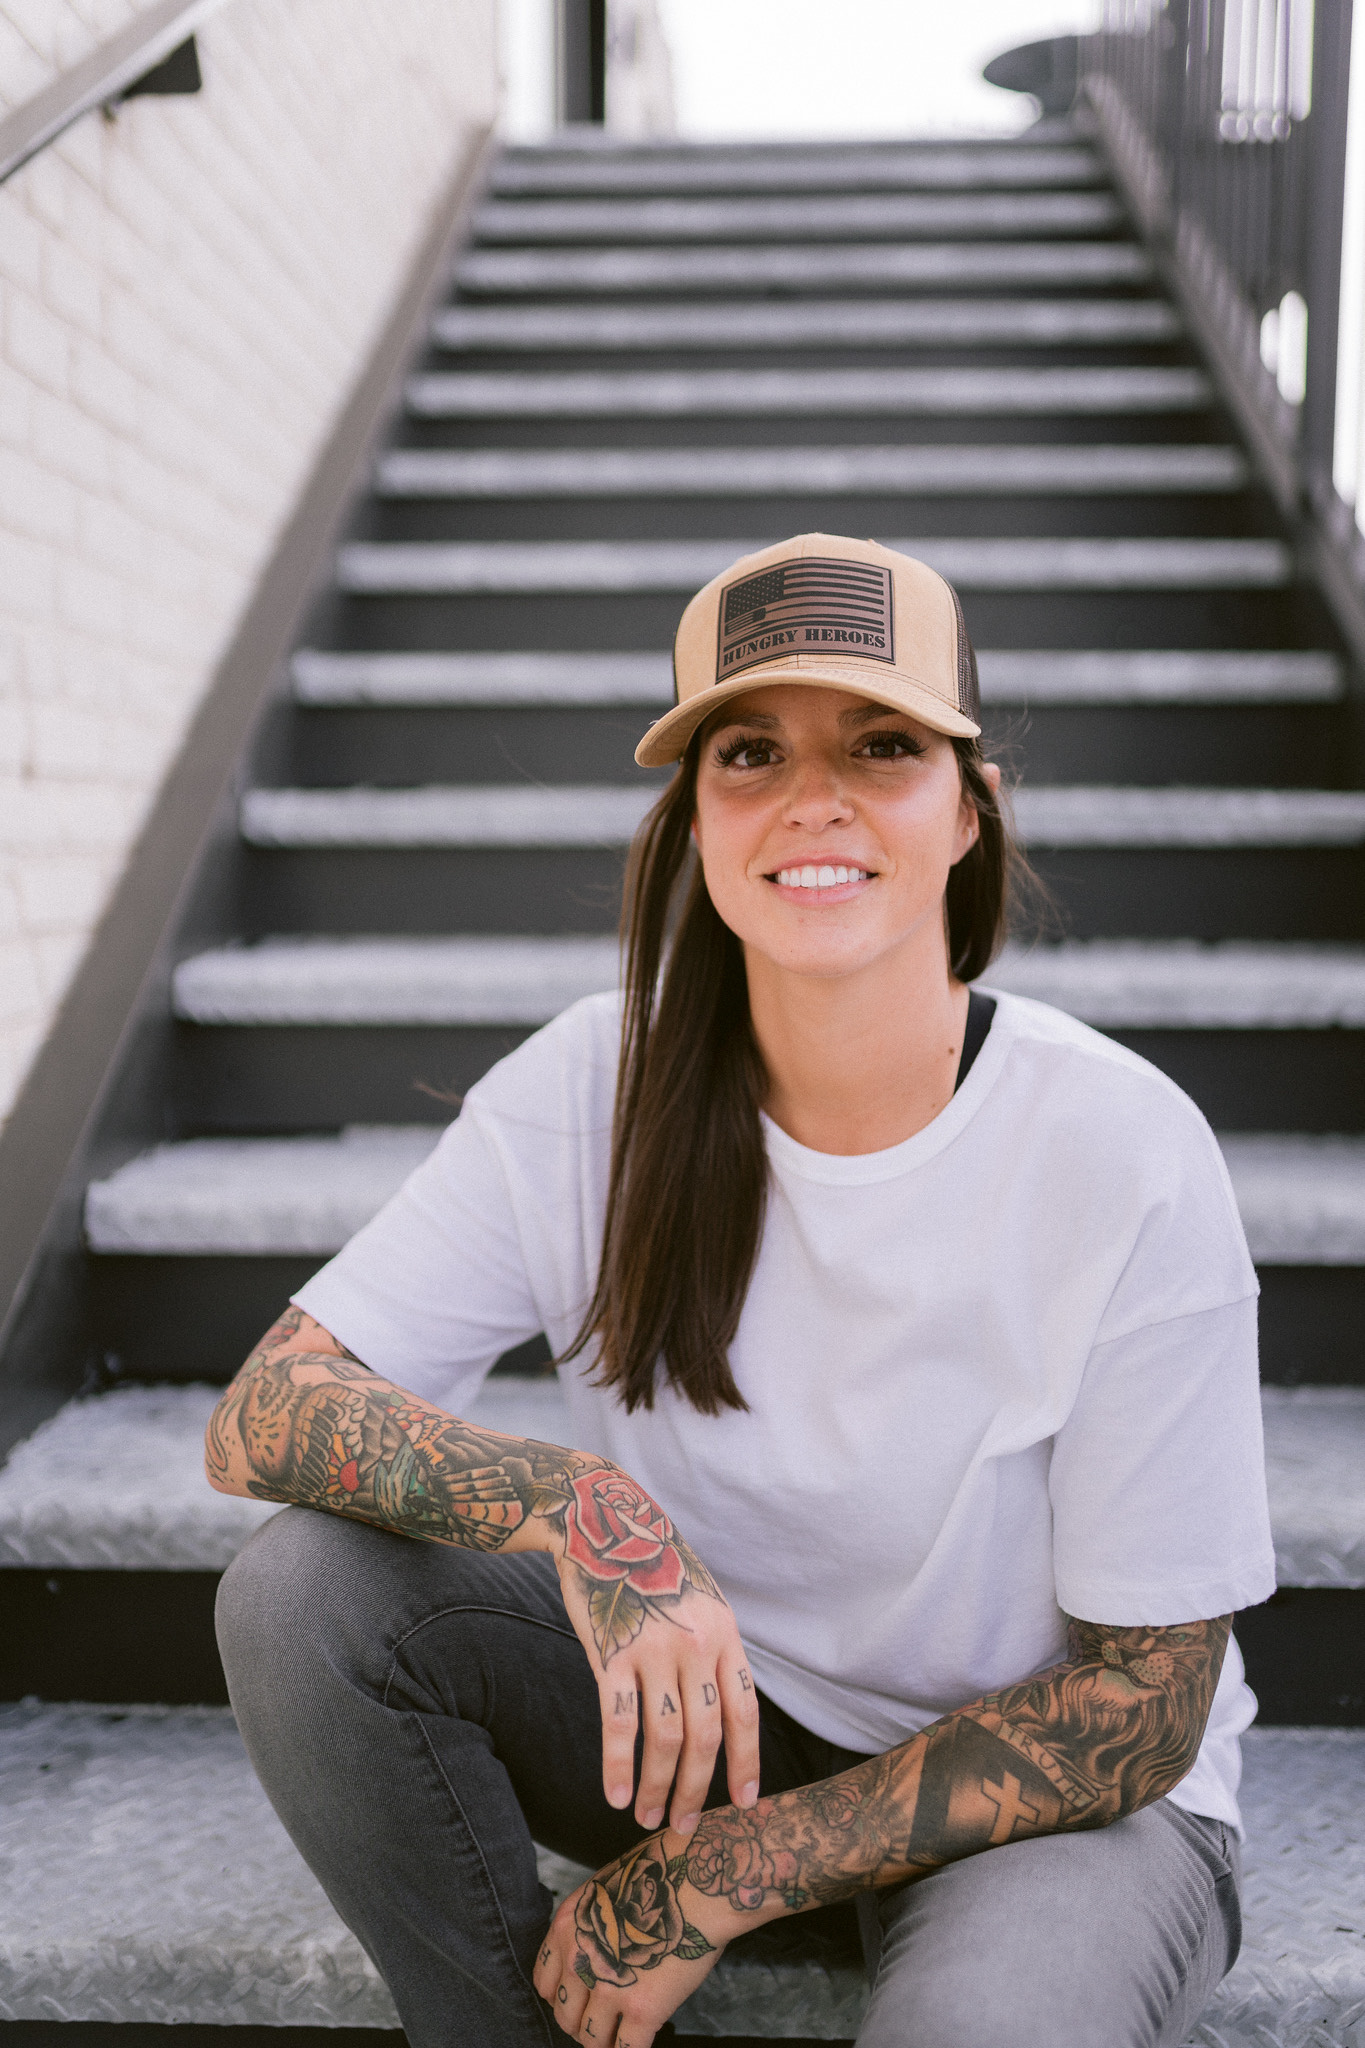 Girl with long brown hair wearing a tan hat sitting on concrete stairs with full sleeve tattoos smiling.